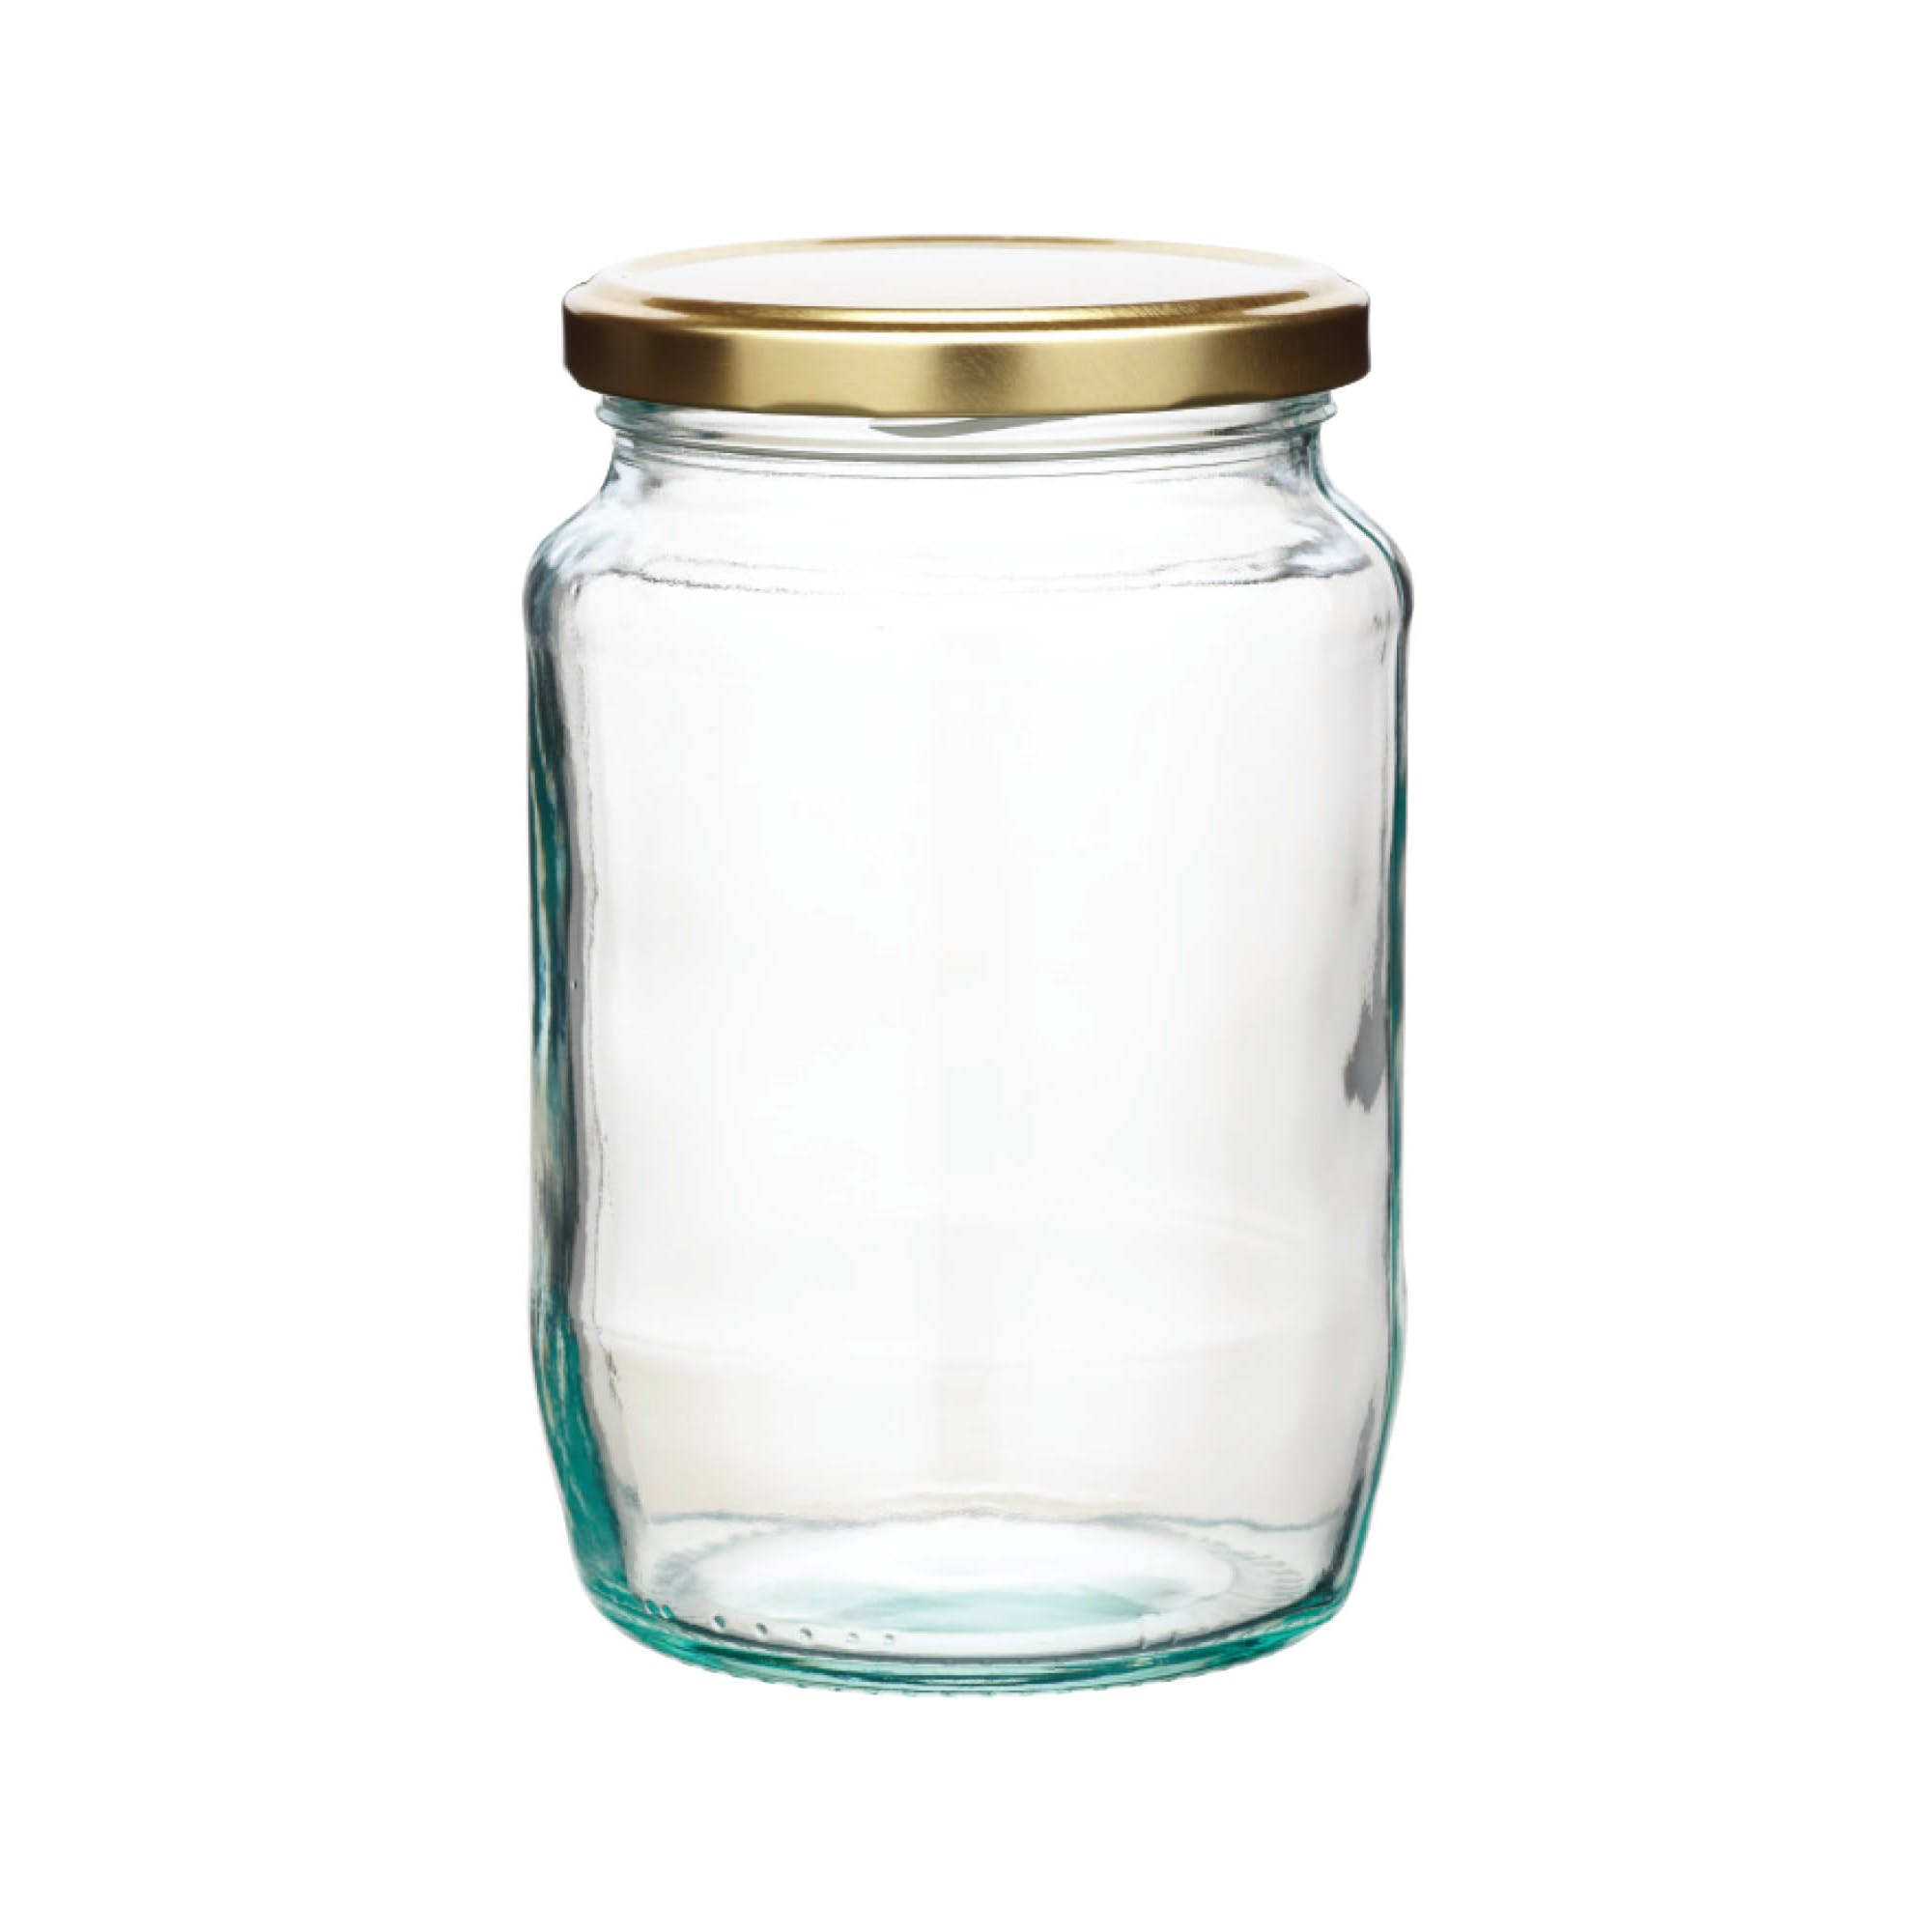 Home Made 908ml (2lb) Round Jam Jar with Twist-off Lid - The Cooks Cupboard Ltd